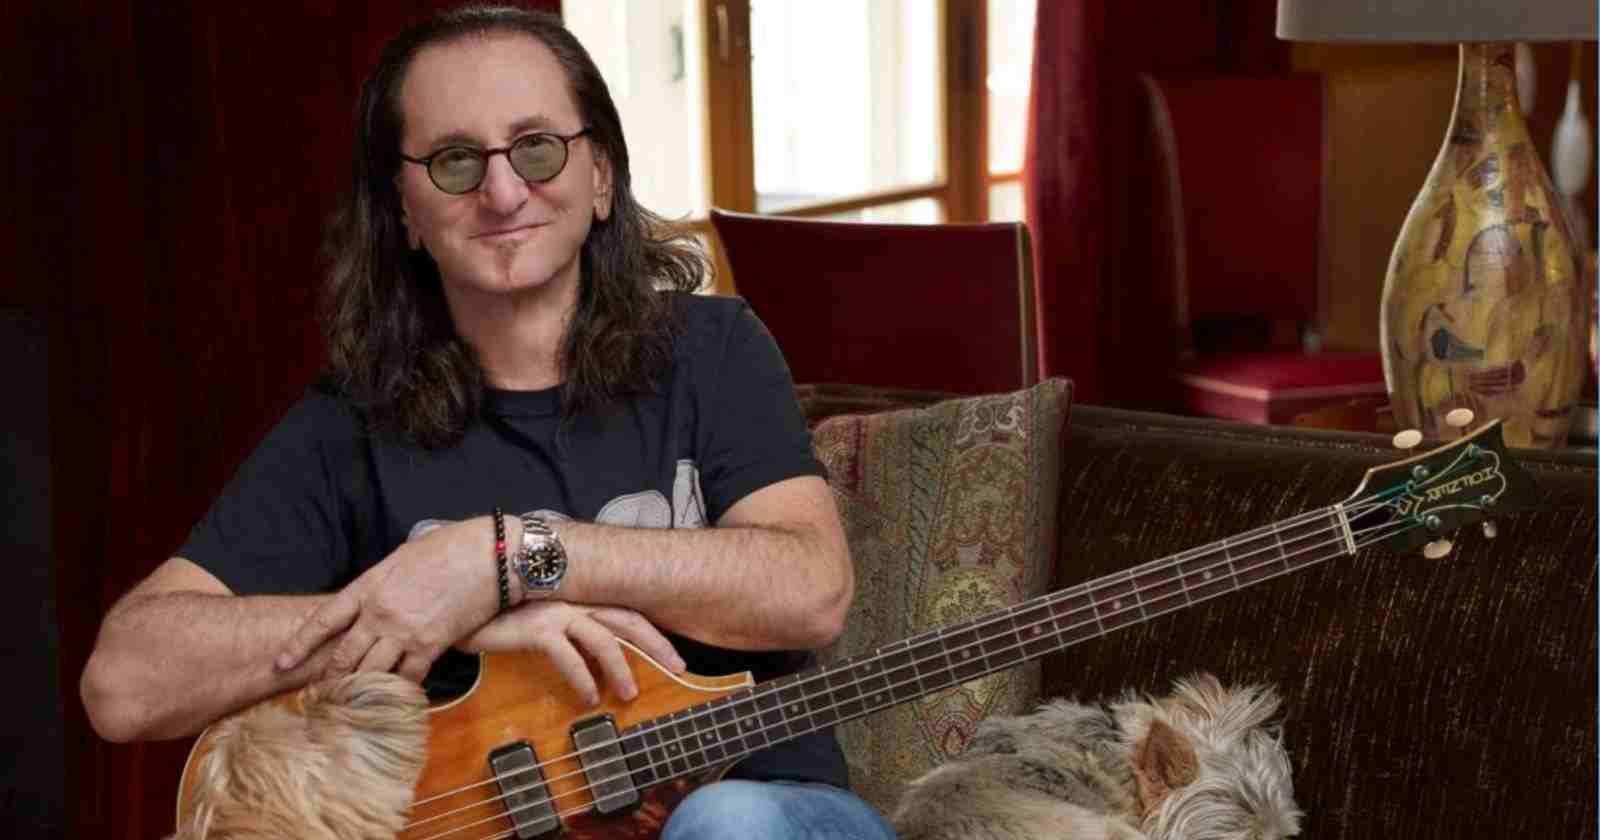 Geddy Lee reveals his favorite singer, album and guitarist of all time